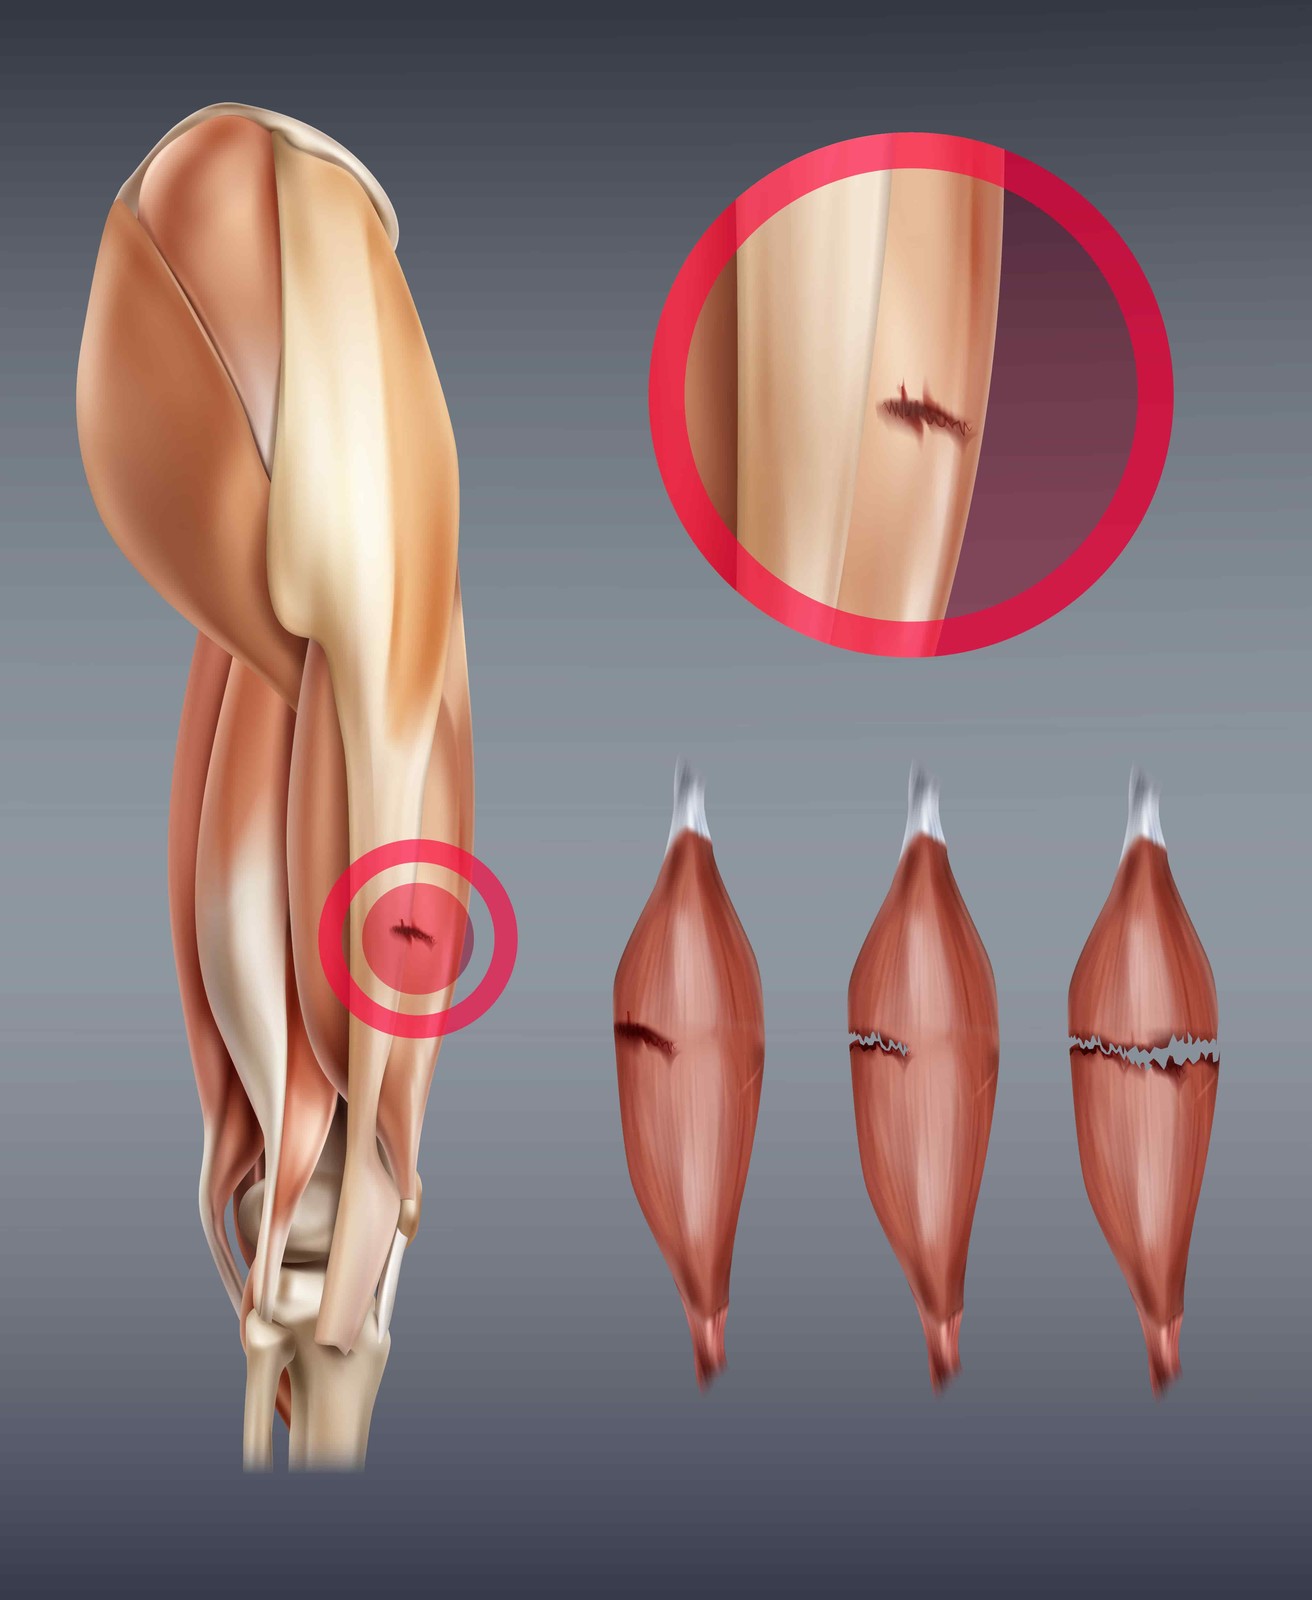 Learn About Grades of Hamstring Muscle Tears and Do Treatment Methods Differ for These Grades?